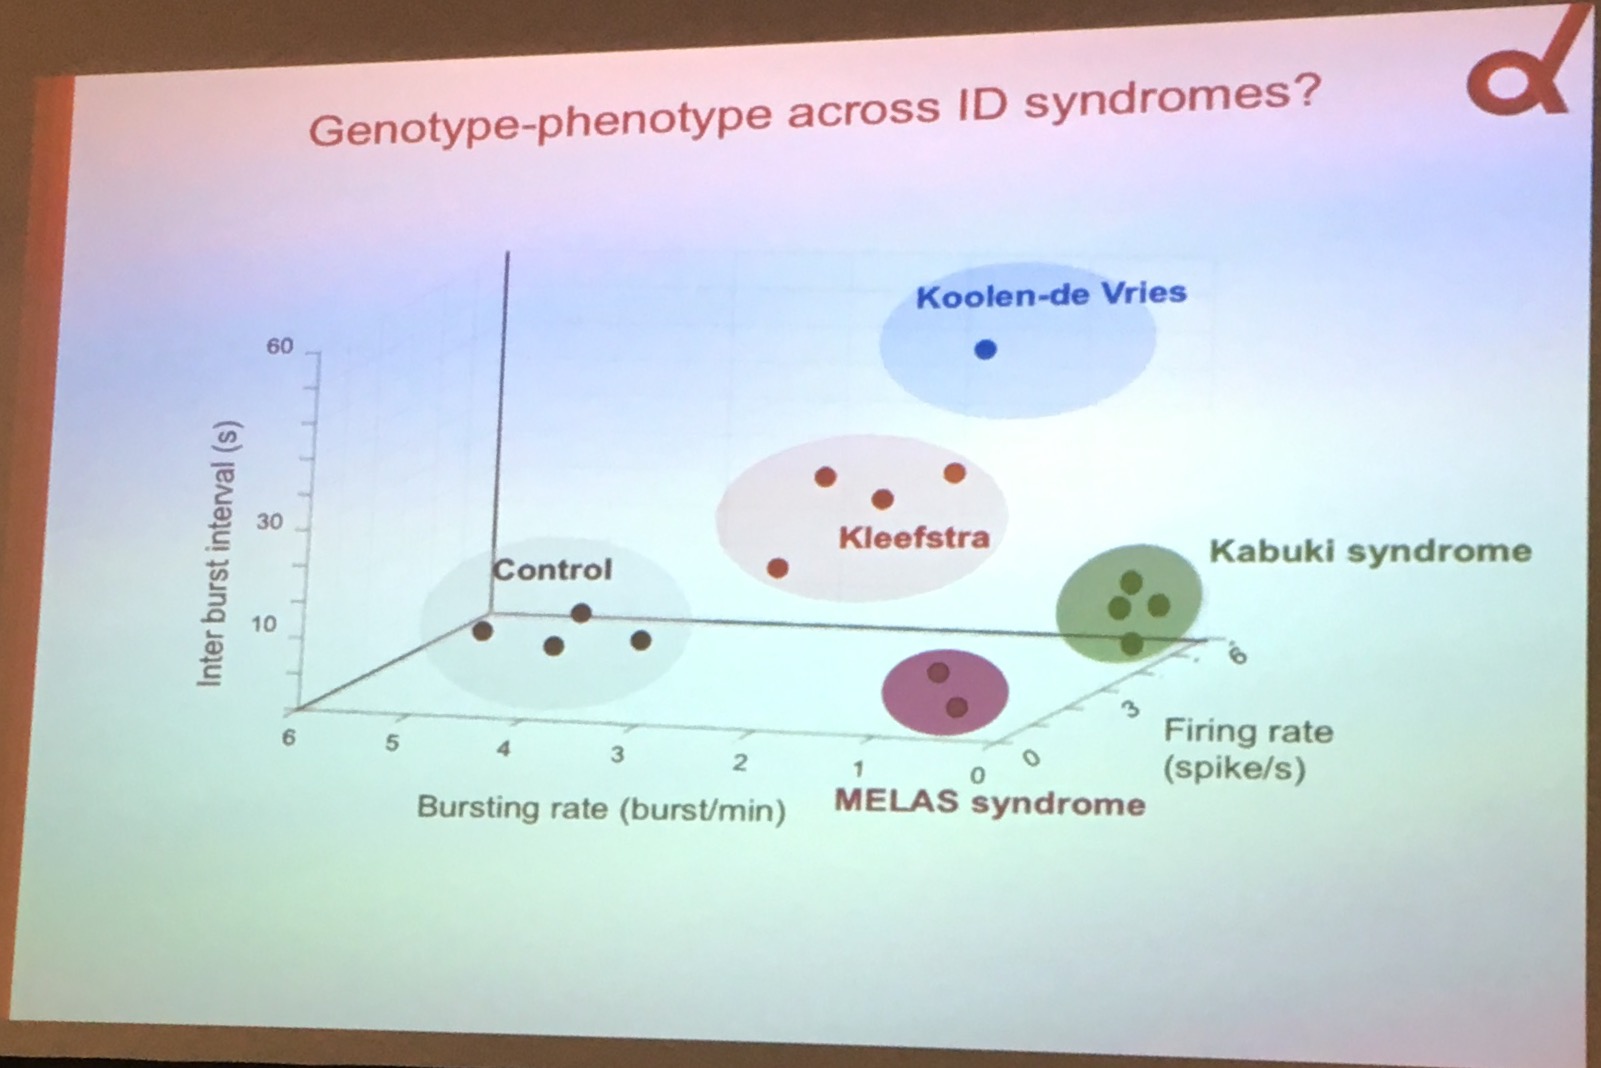 Clustering of different genetic disorders